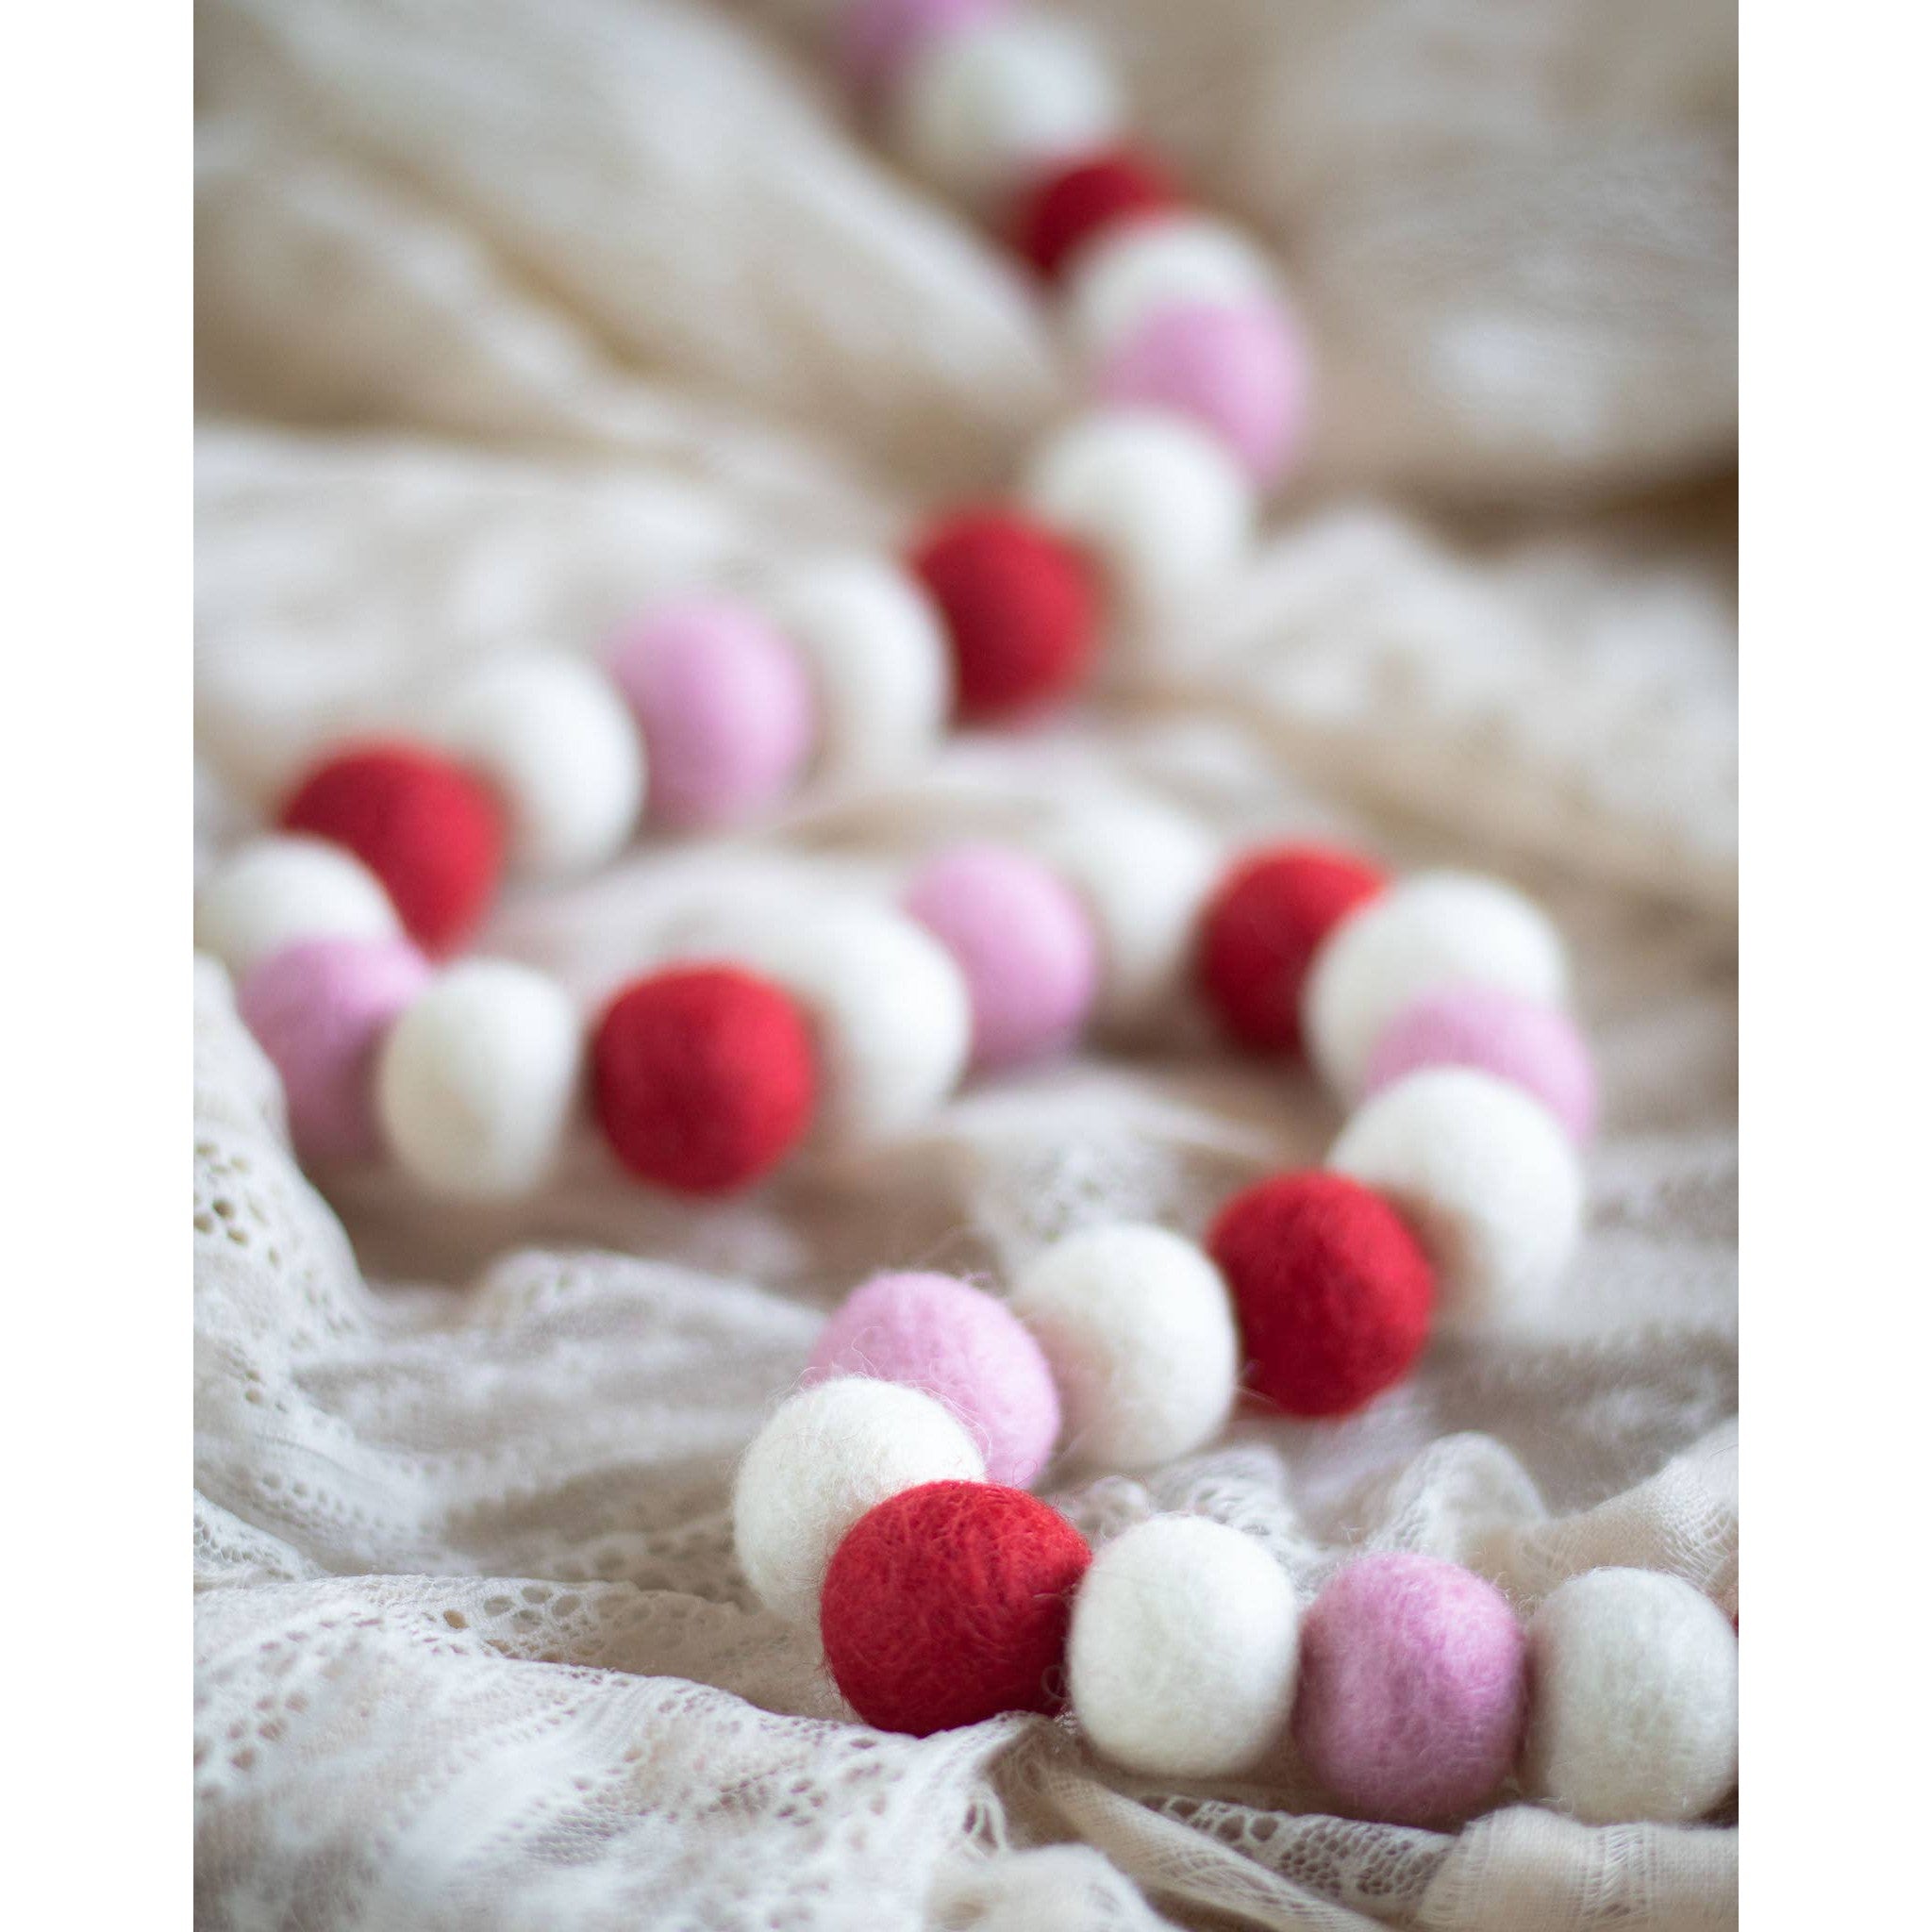 Red Valentine Eco Garlands/Ornaments: S - 24 beads/8ft (1" beads)